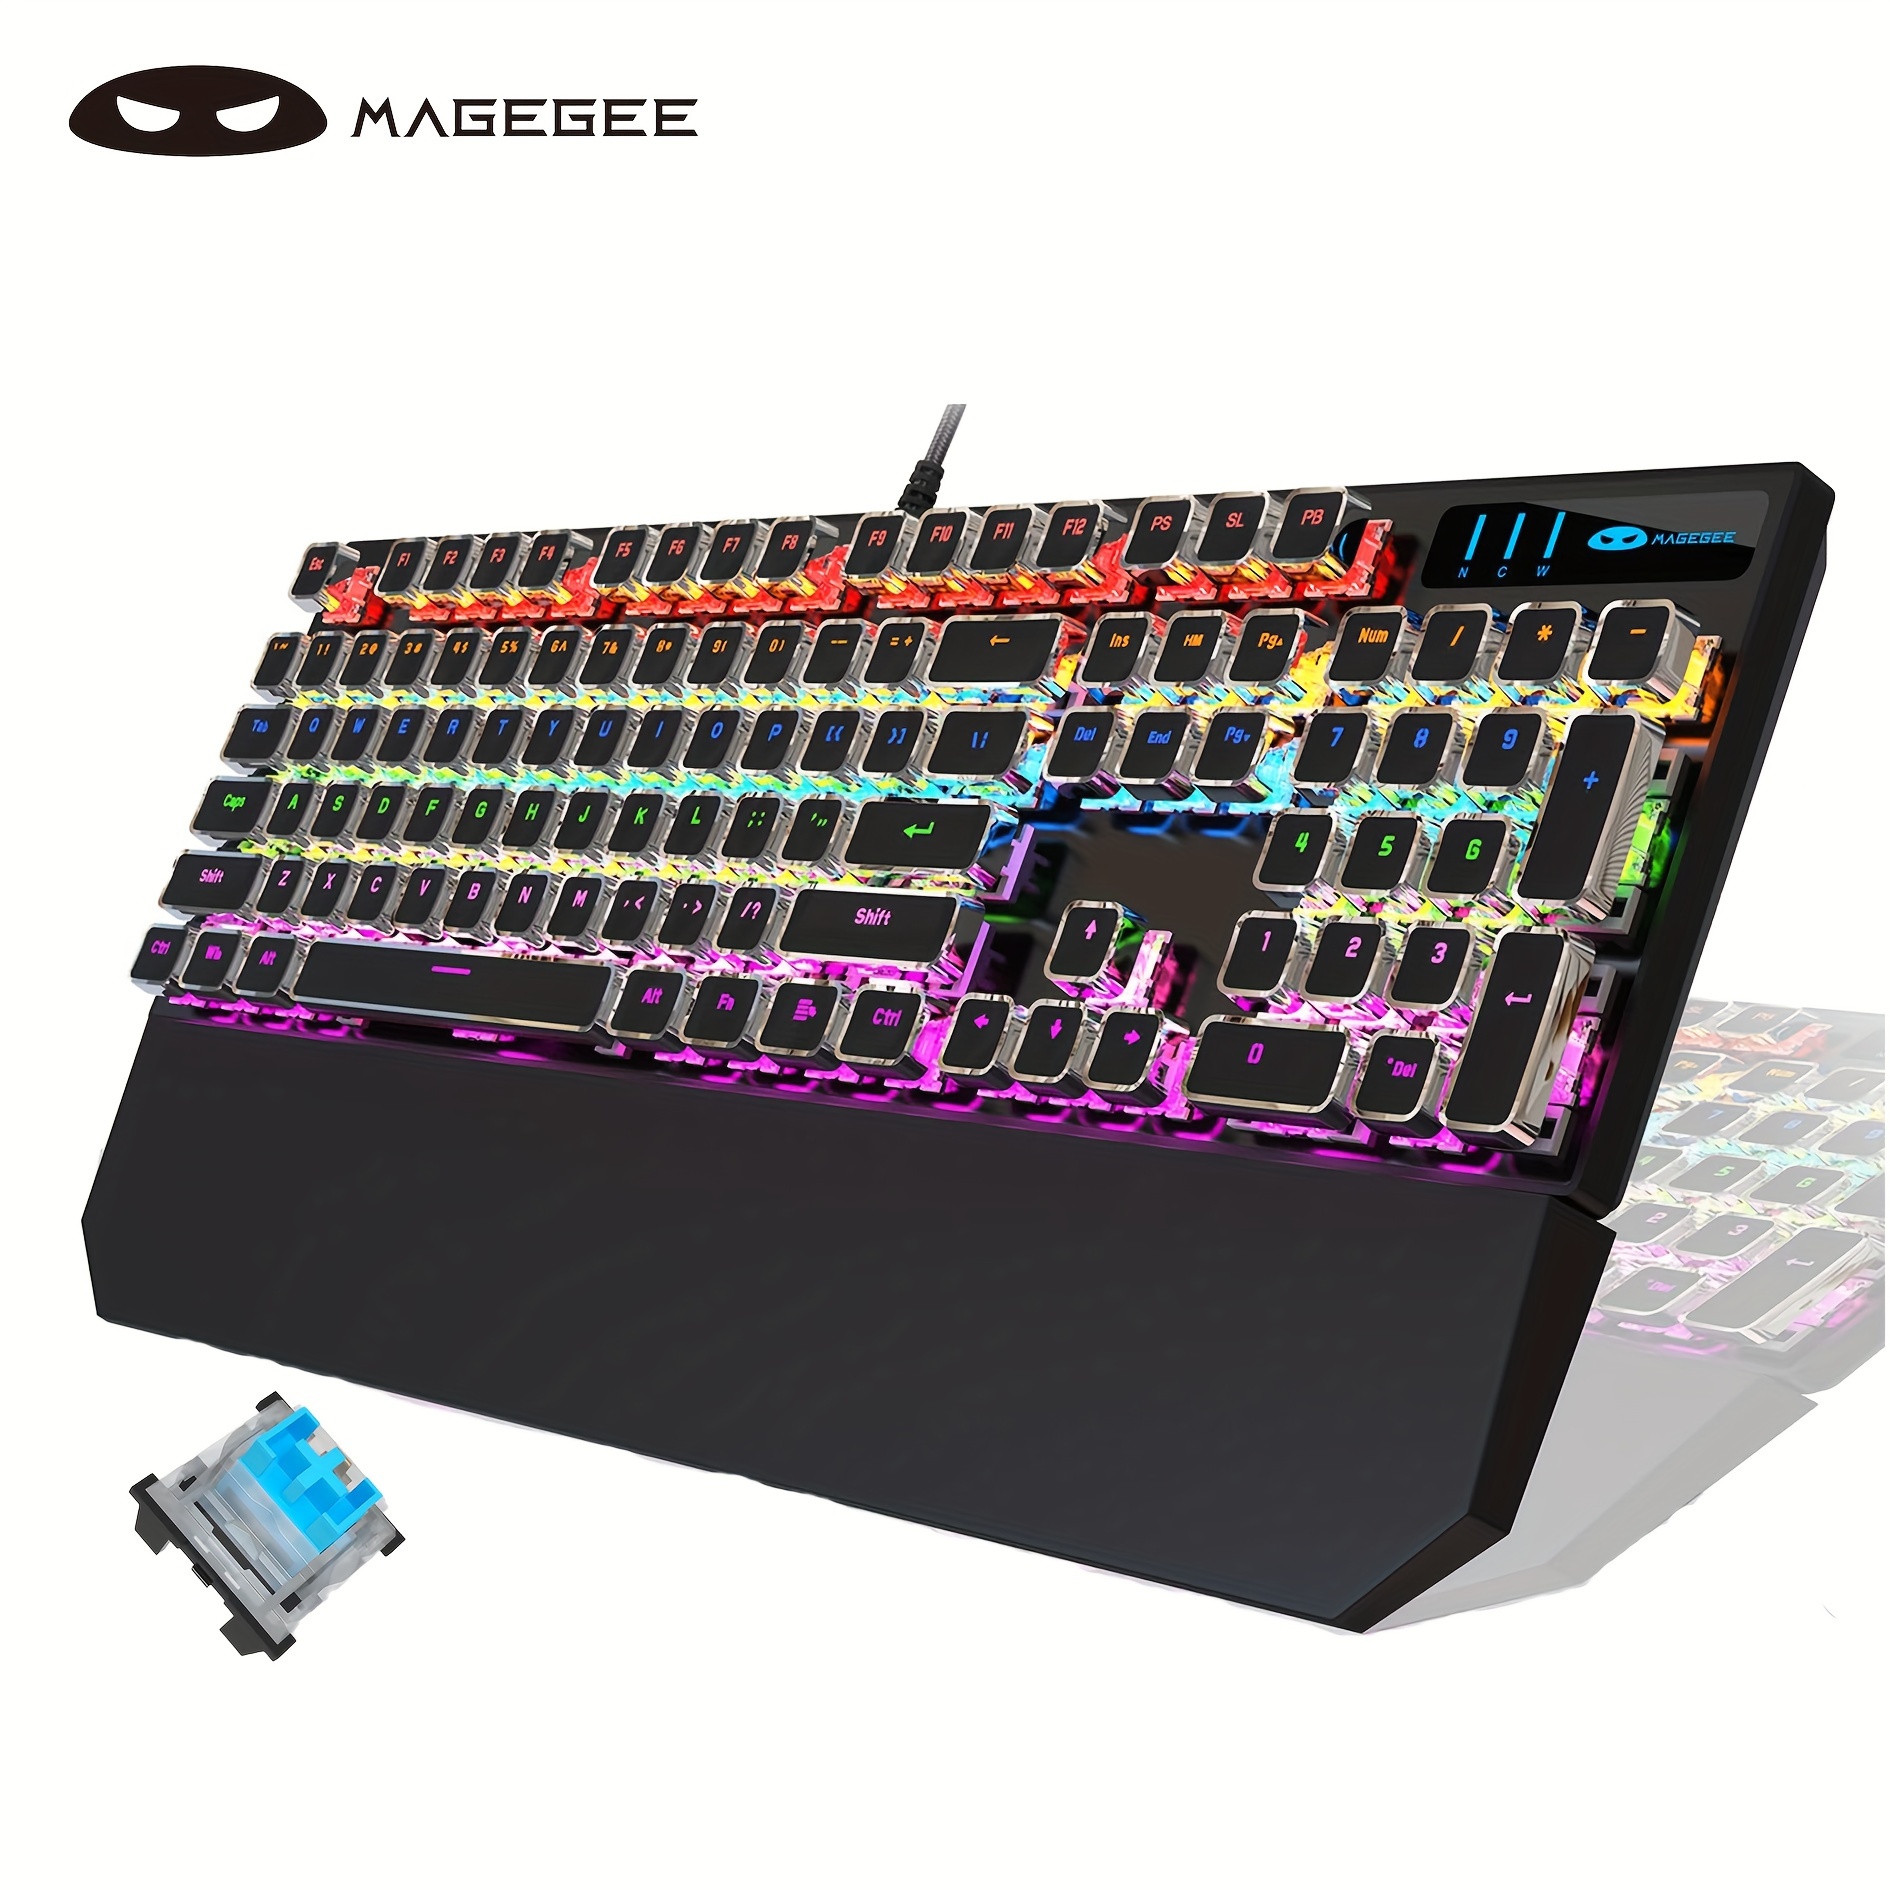 

Magegee Typewriter Style Mechanical Gaming Keyboard, Black Retro Punk Gaming Keyboard With Rgb Backlit, 104 Keys Blue Switch Wired Cute Keyboard, Unique Square Keycaps For Windows//pc